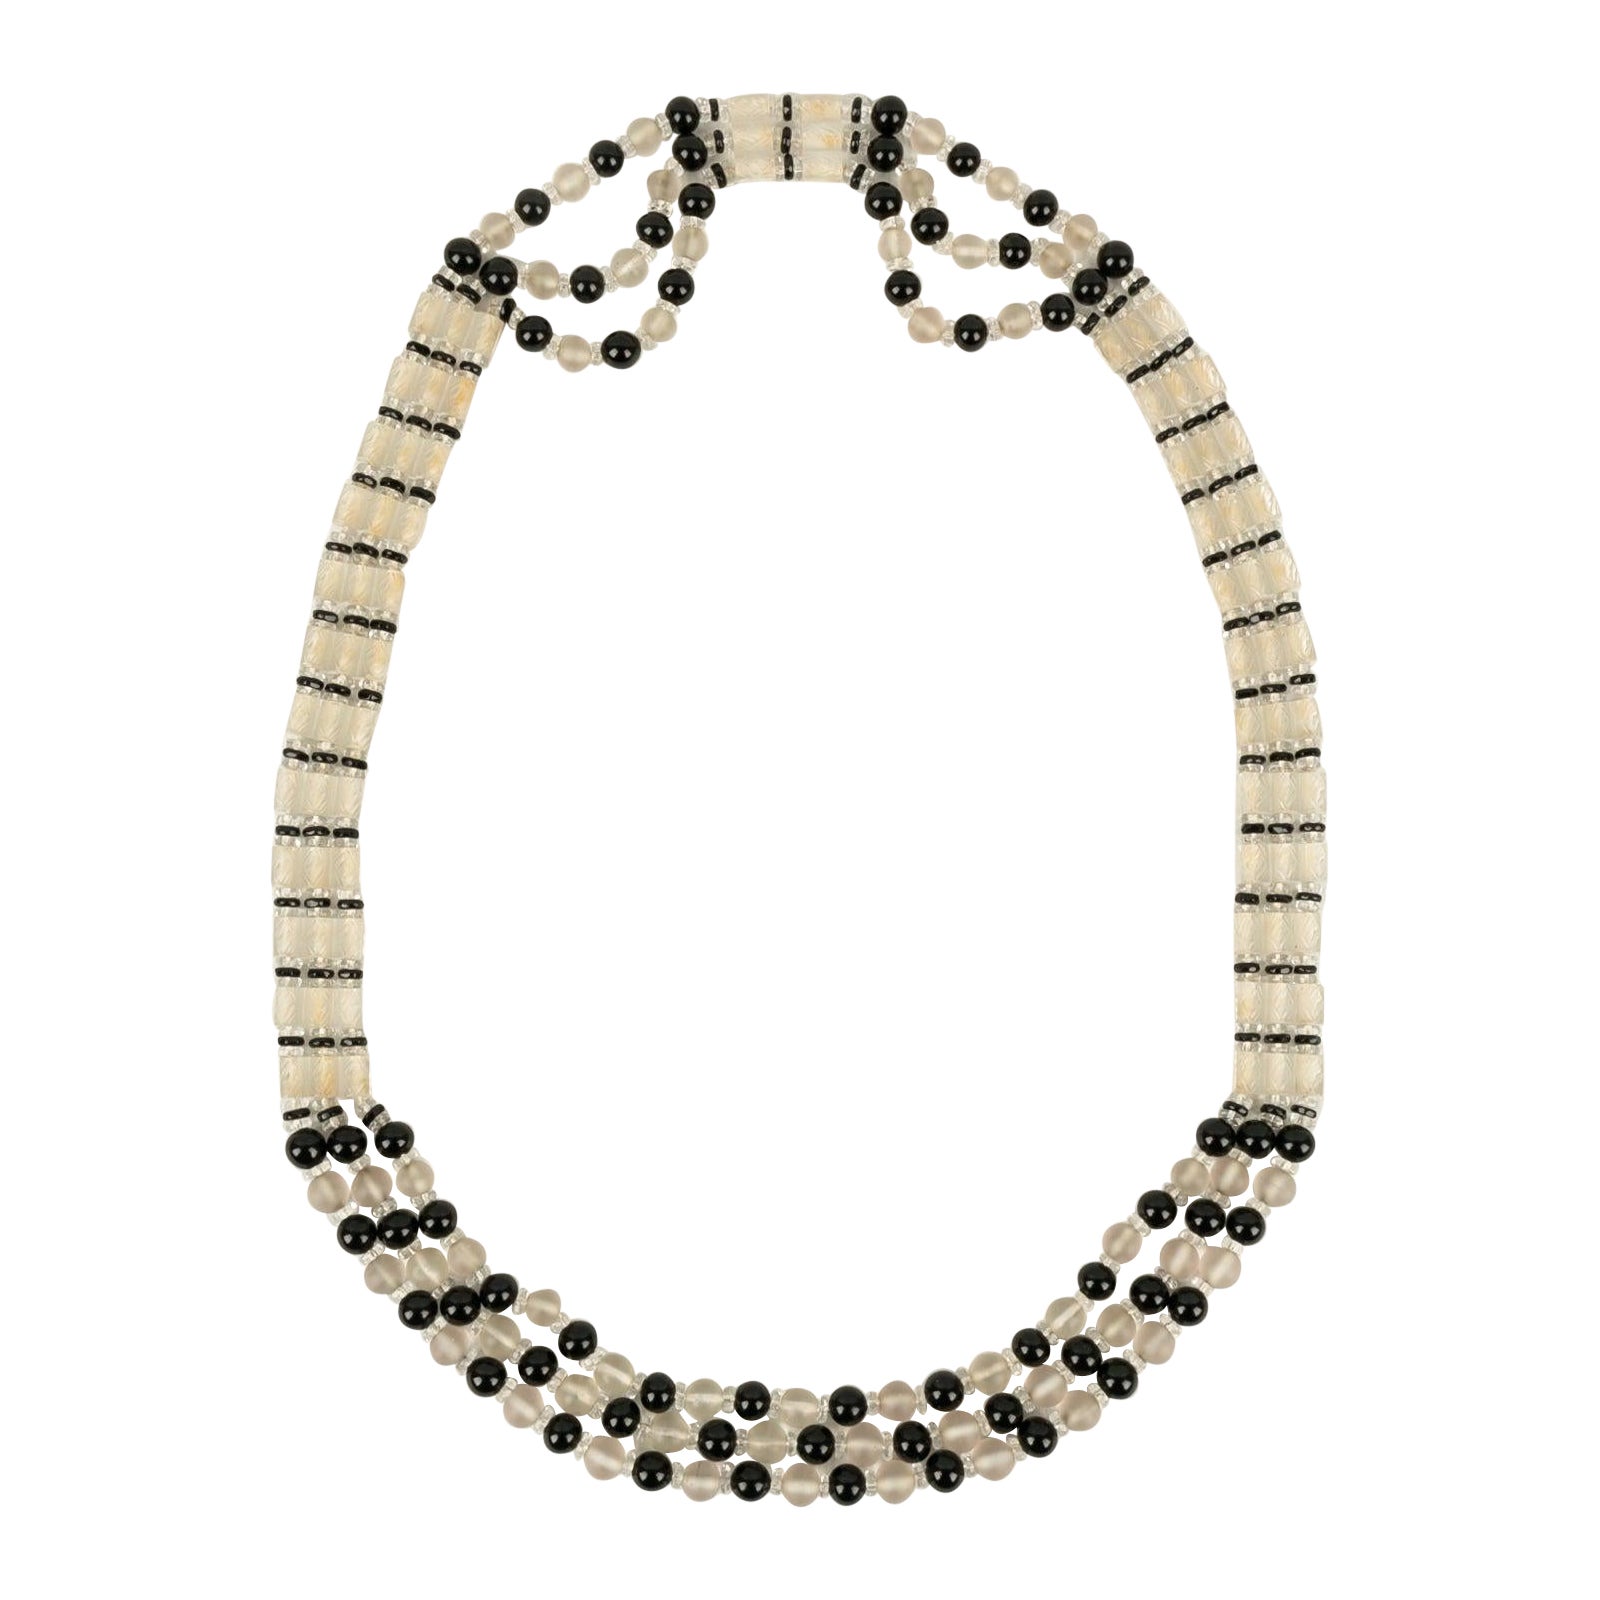 Rousselet Necklace in Transparent and Black Glass Pearls, 1920s